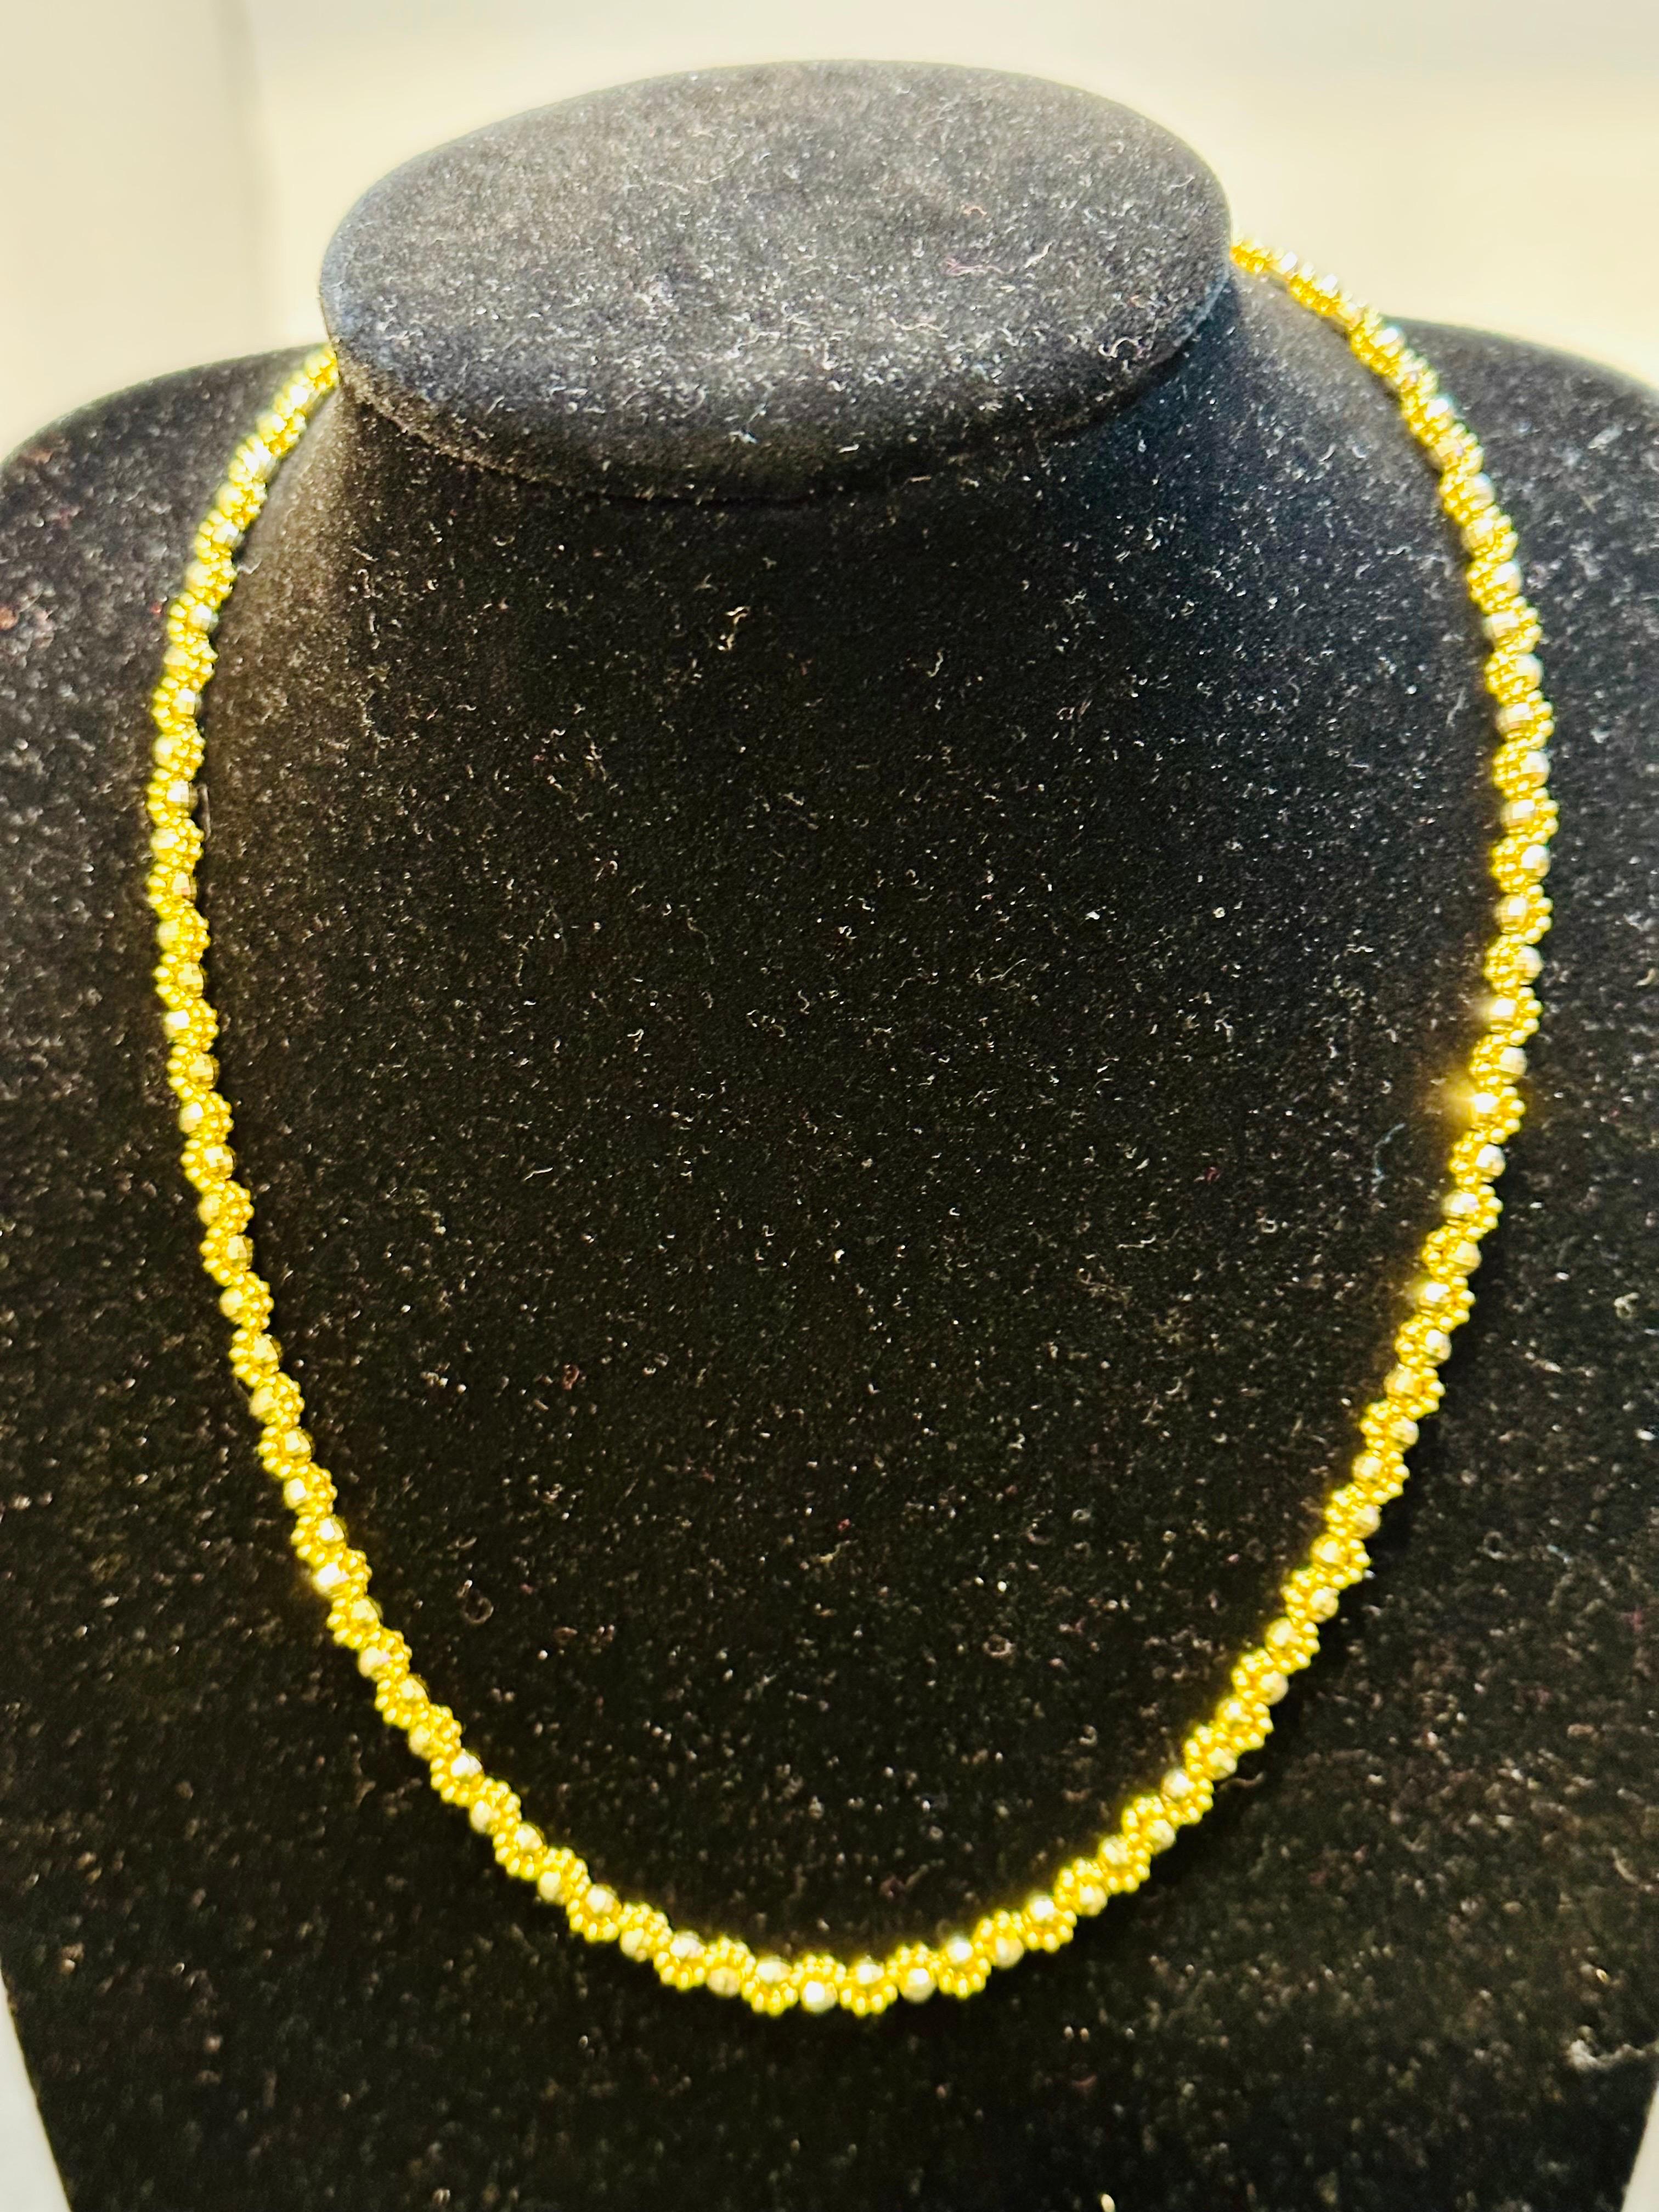 Vintage 14 Karat Yellow Gold 13 Gm, Twisted Chains with Balls in Between For Sale 2